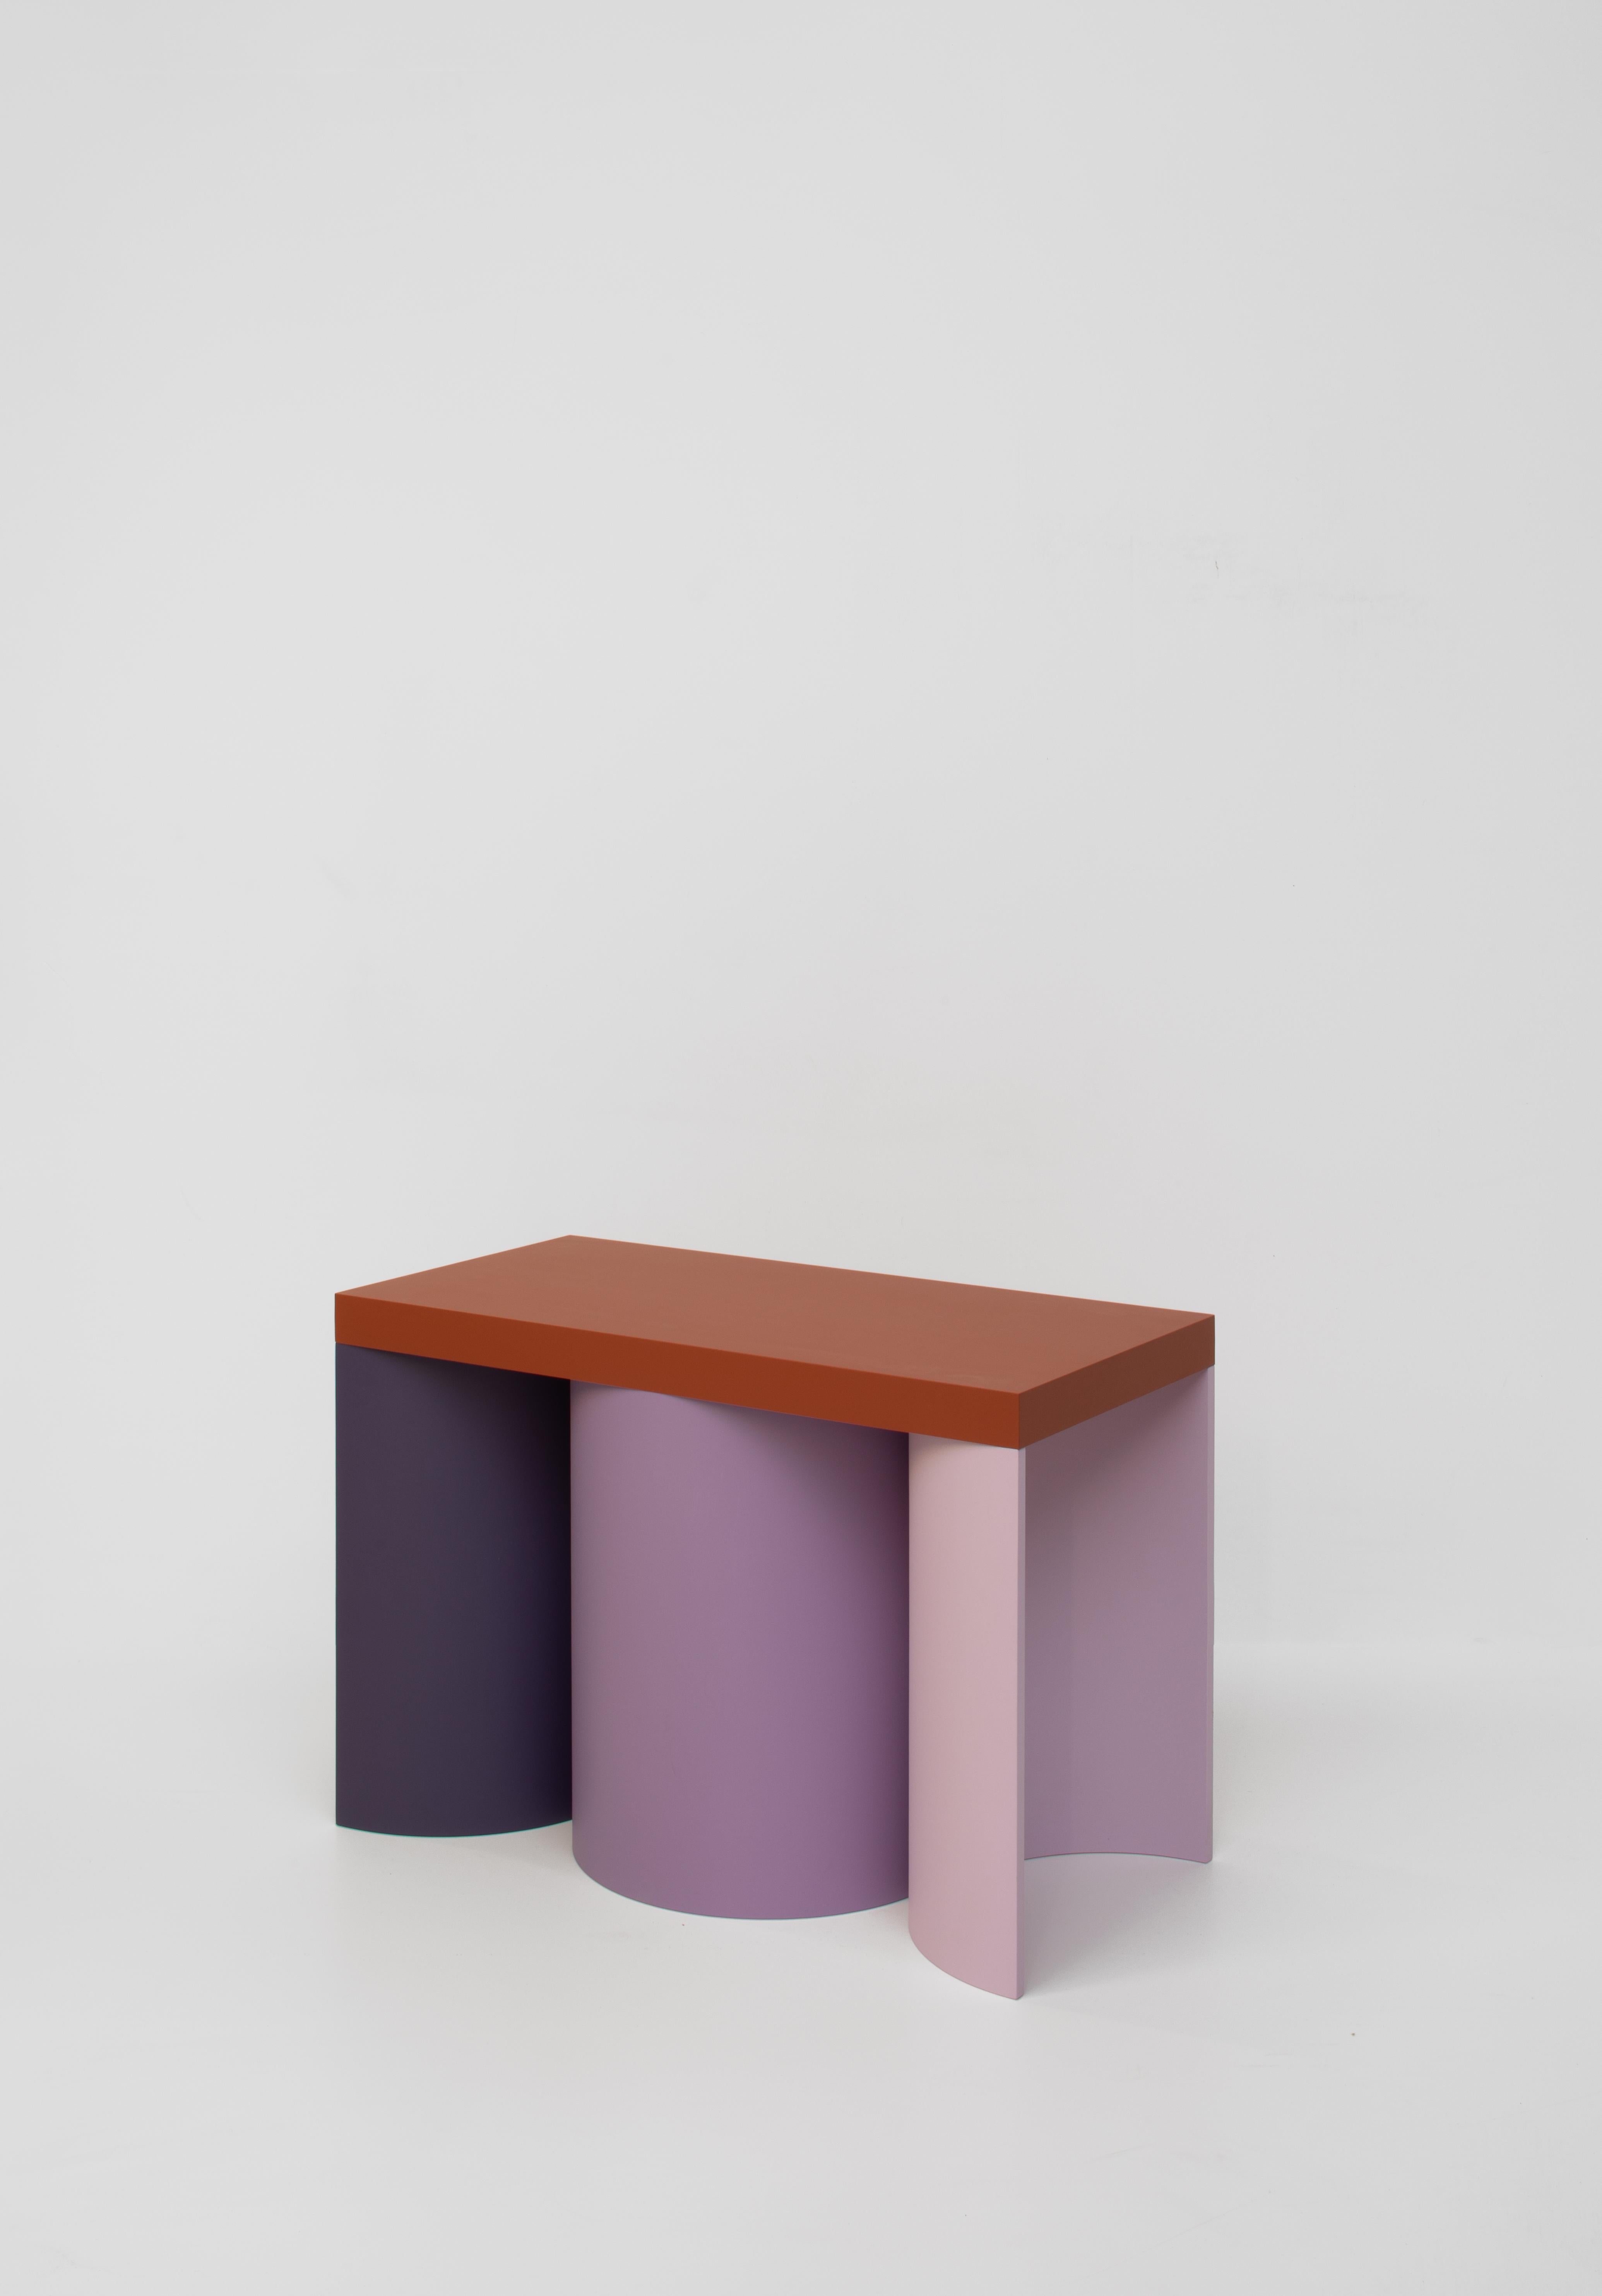 Colourful stool with a contemporary design.
Manufactured in an artisanal way, in which every step of the process is carefully executed. The base of this stool consists of varying numbers of hollow cylinders. It's topped with a slab surface for